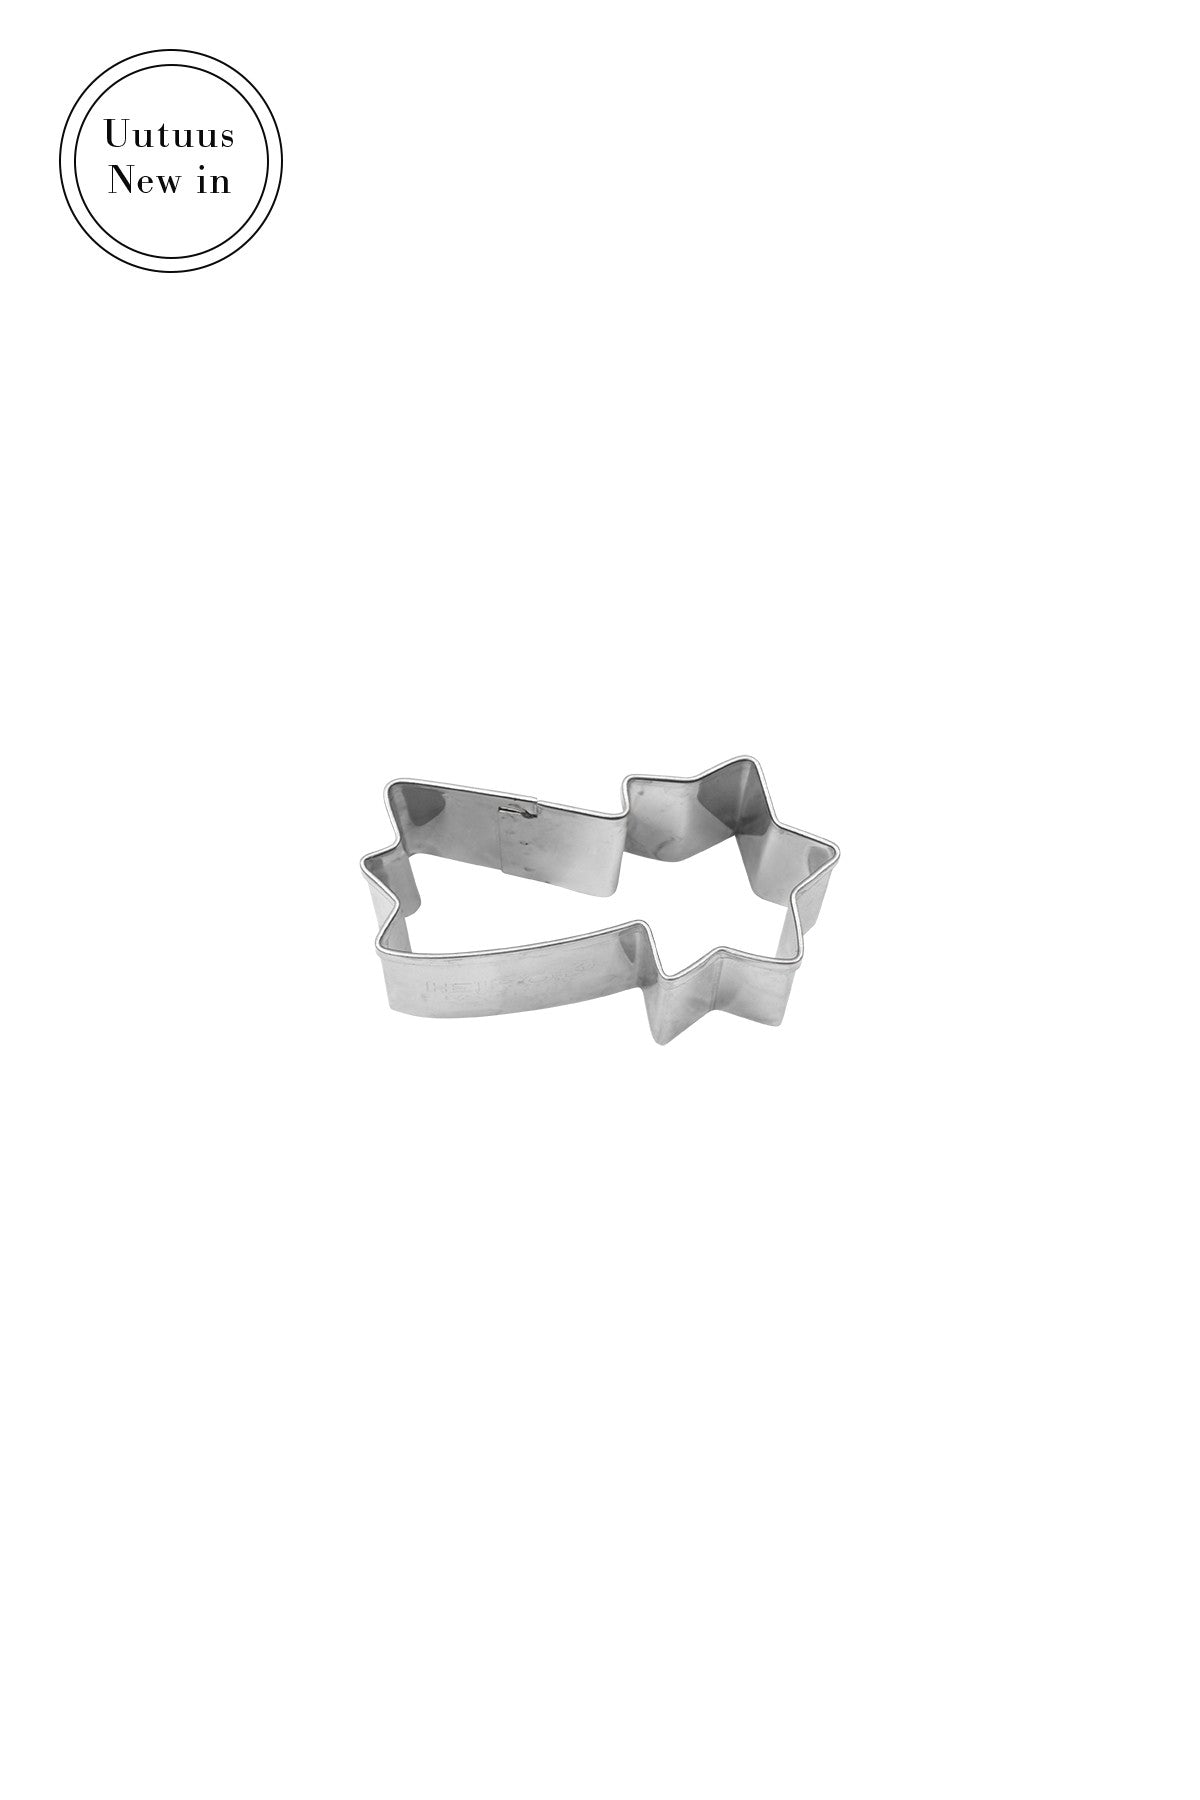 SHOOTING STAR 8 cm COOKIE CUTTER